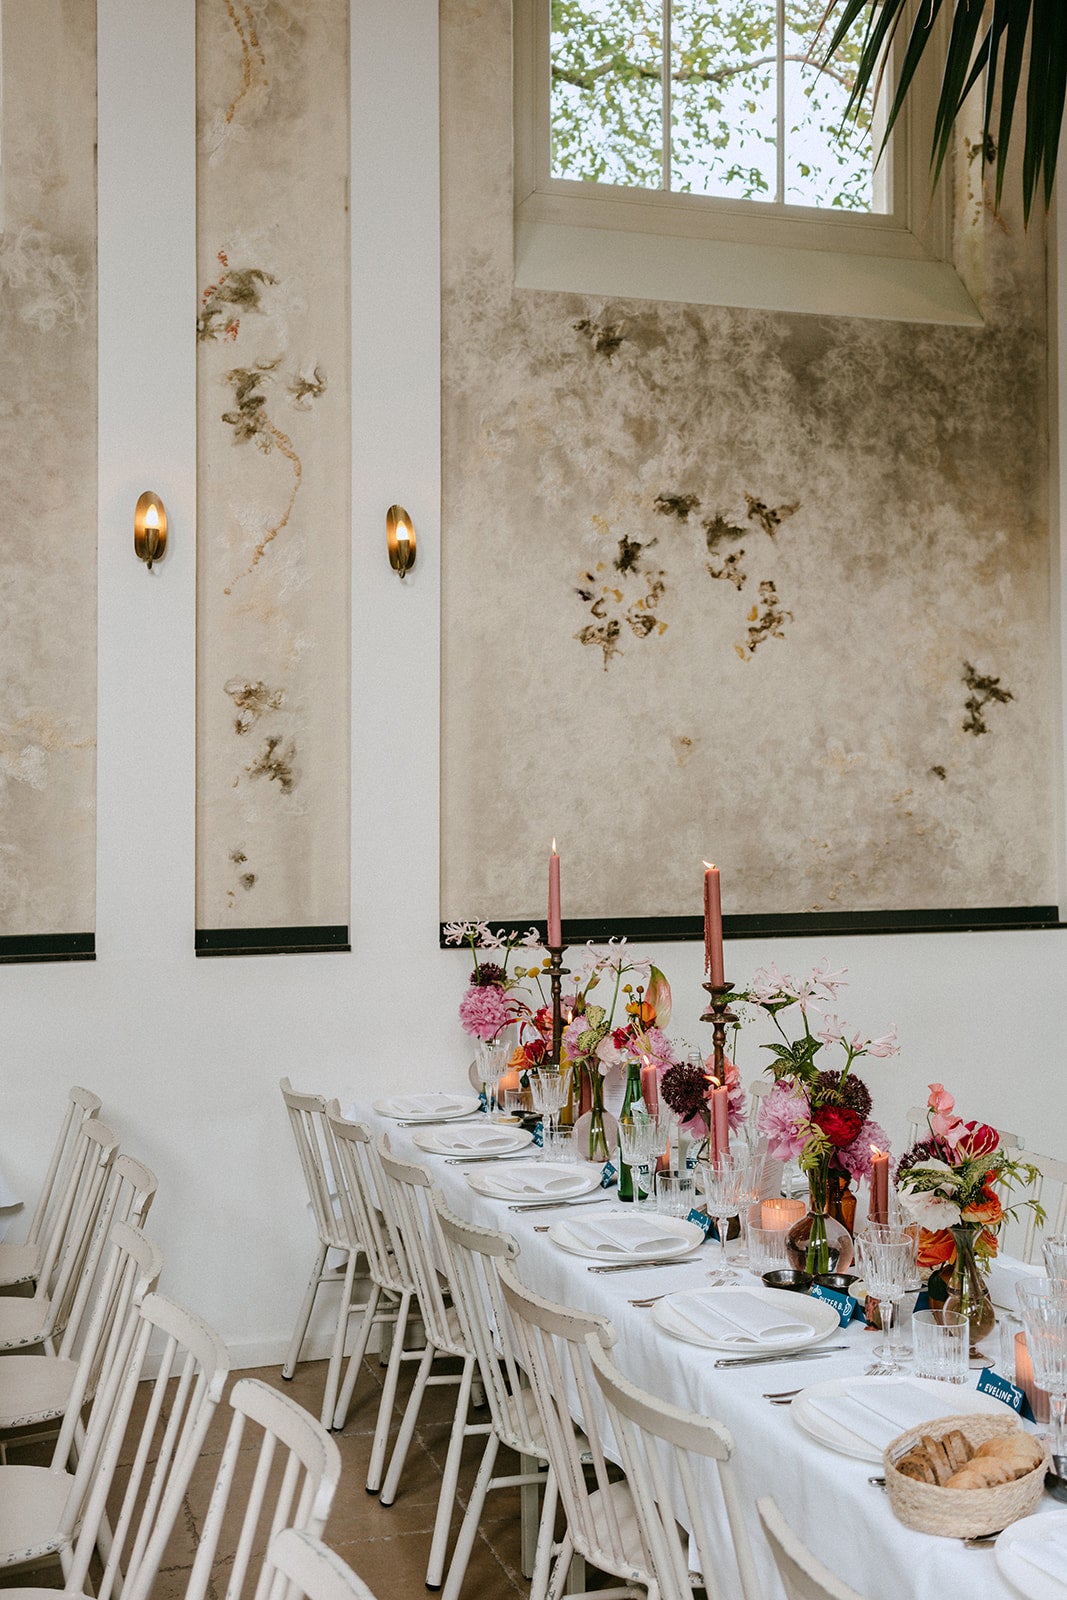 venue with worn walls and dinner table